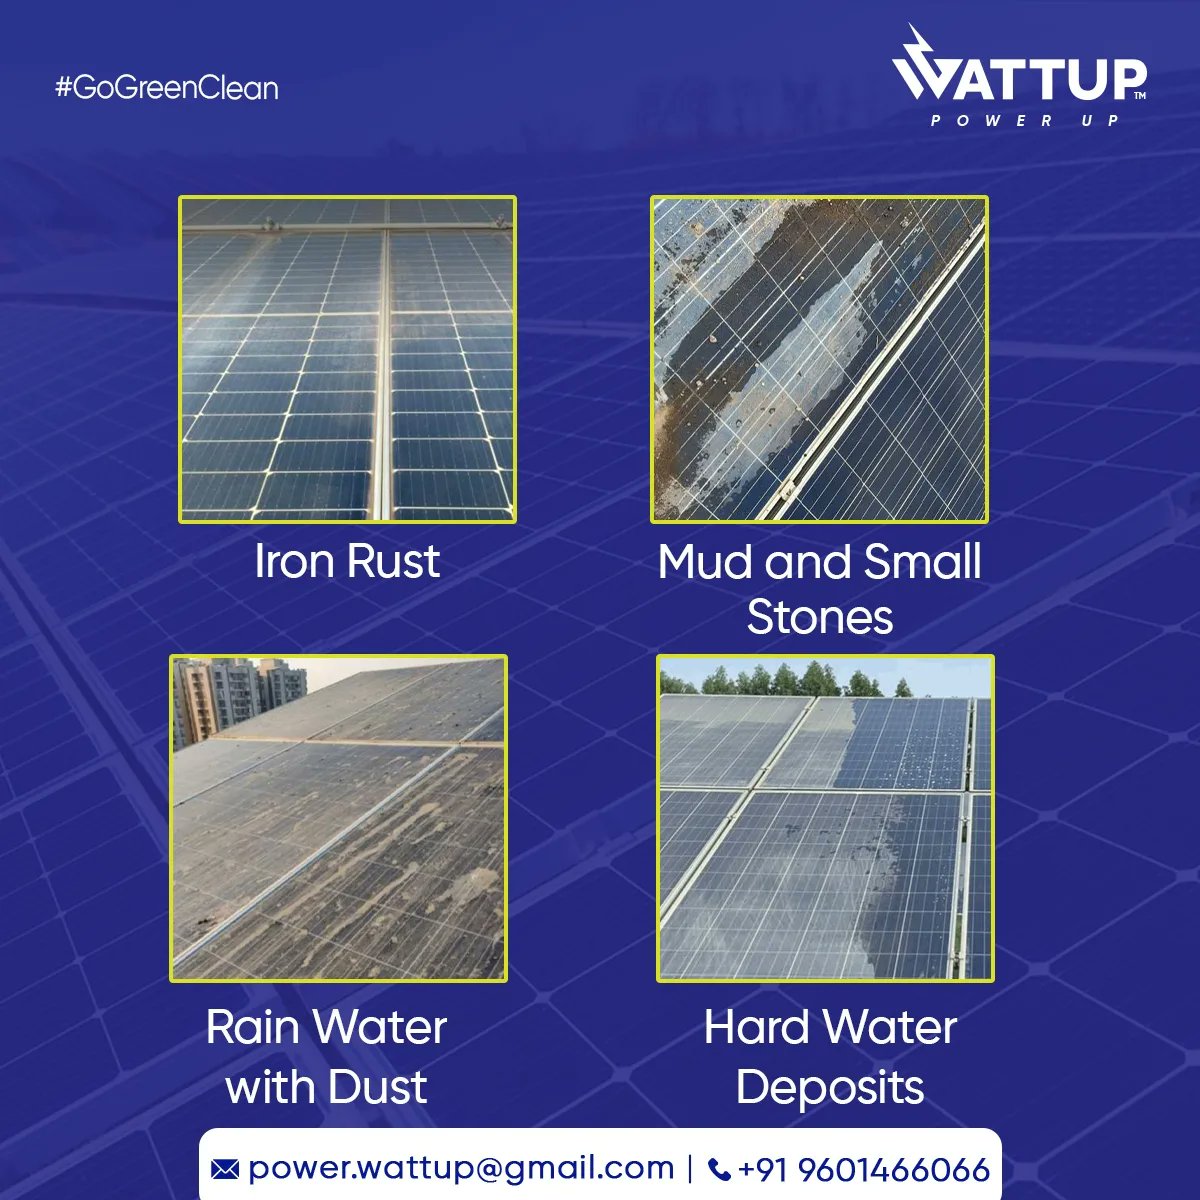 Discover the power of WattUp solar panel cleaning solution. Increased energy generation, restored excellence, and eco-friendly cleaning.

#WattUp #WattUpSolution #PowerWattup #SolarPanelCleaning #RenewableEnergy #EnergyEfficiency #CleanEnergy #SolarMaintenance #GreenEnergy